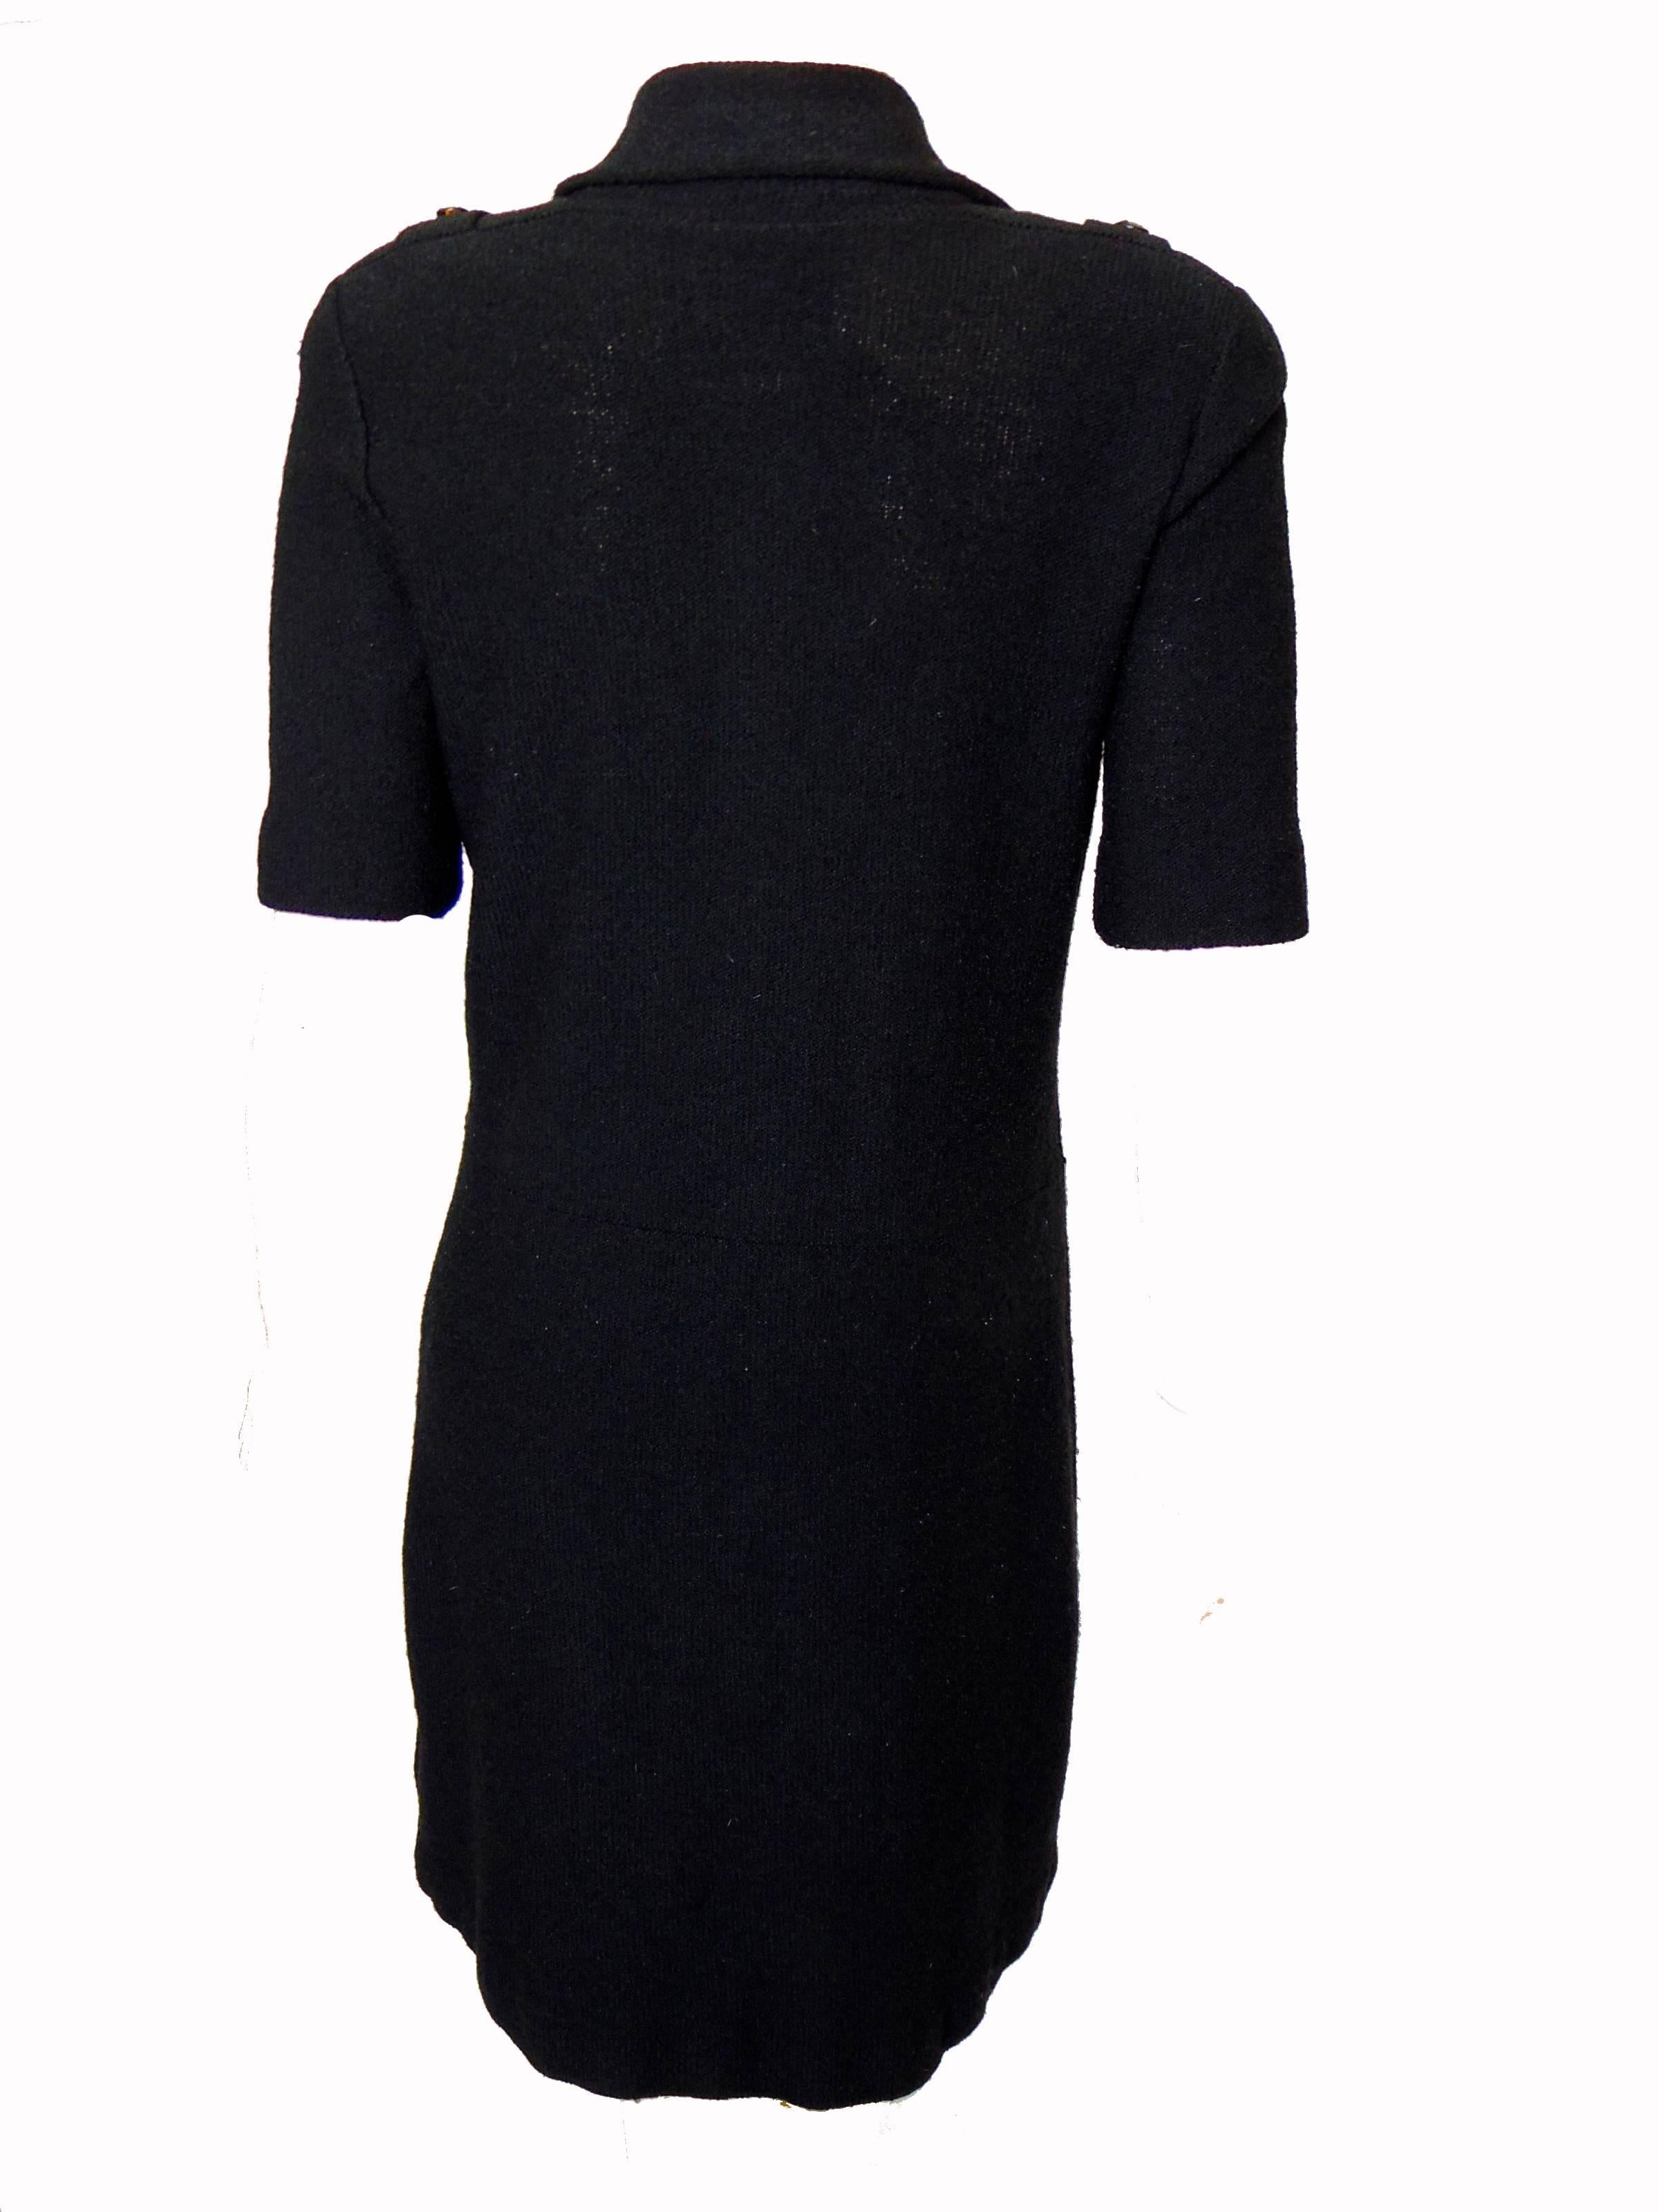 Women's Steve Fabrikant for Neiman Marcus Black Knit Dress with Dragonfly Buttons M 90s